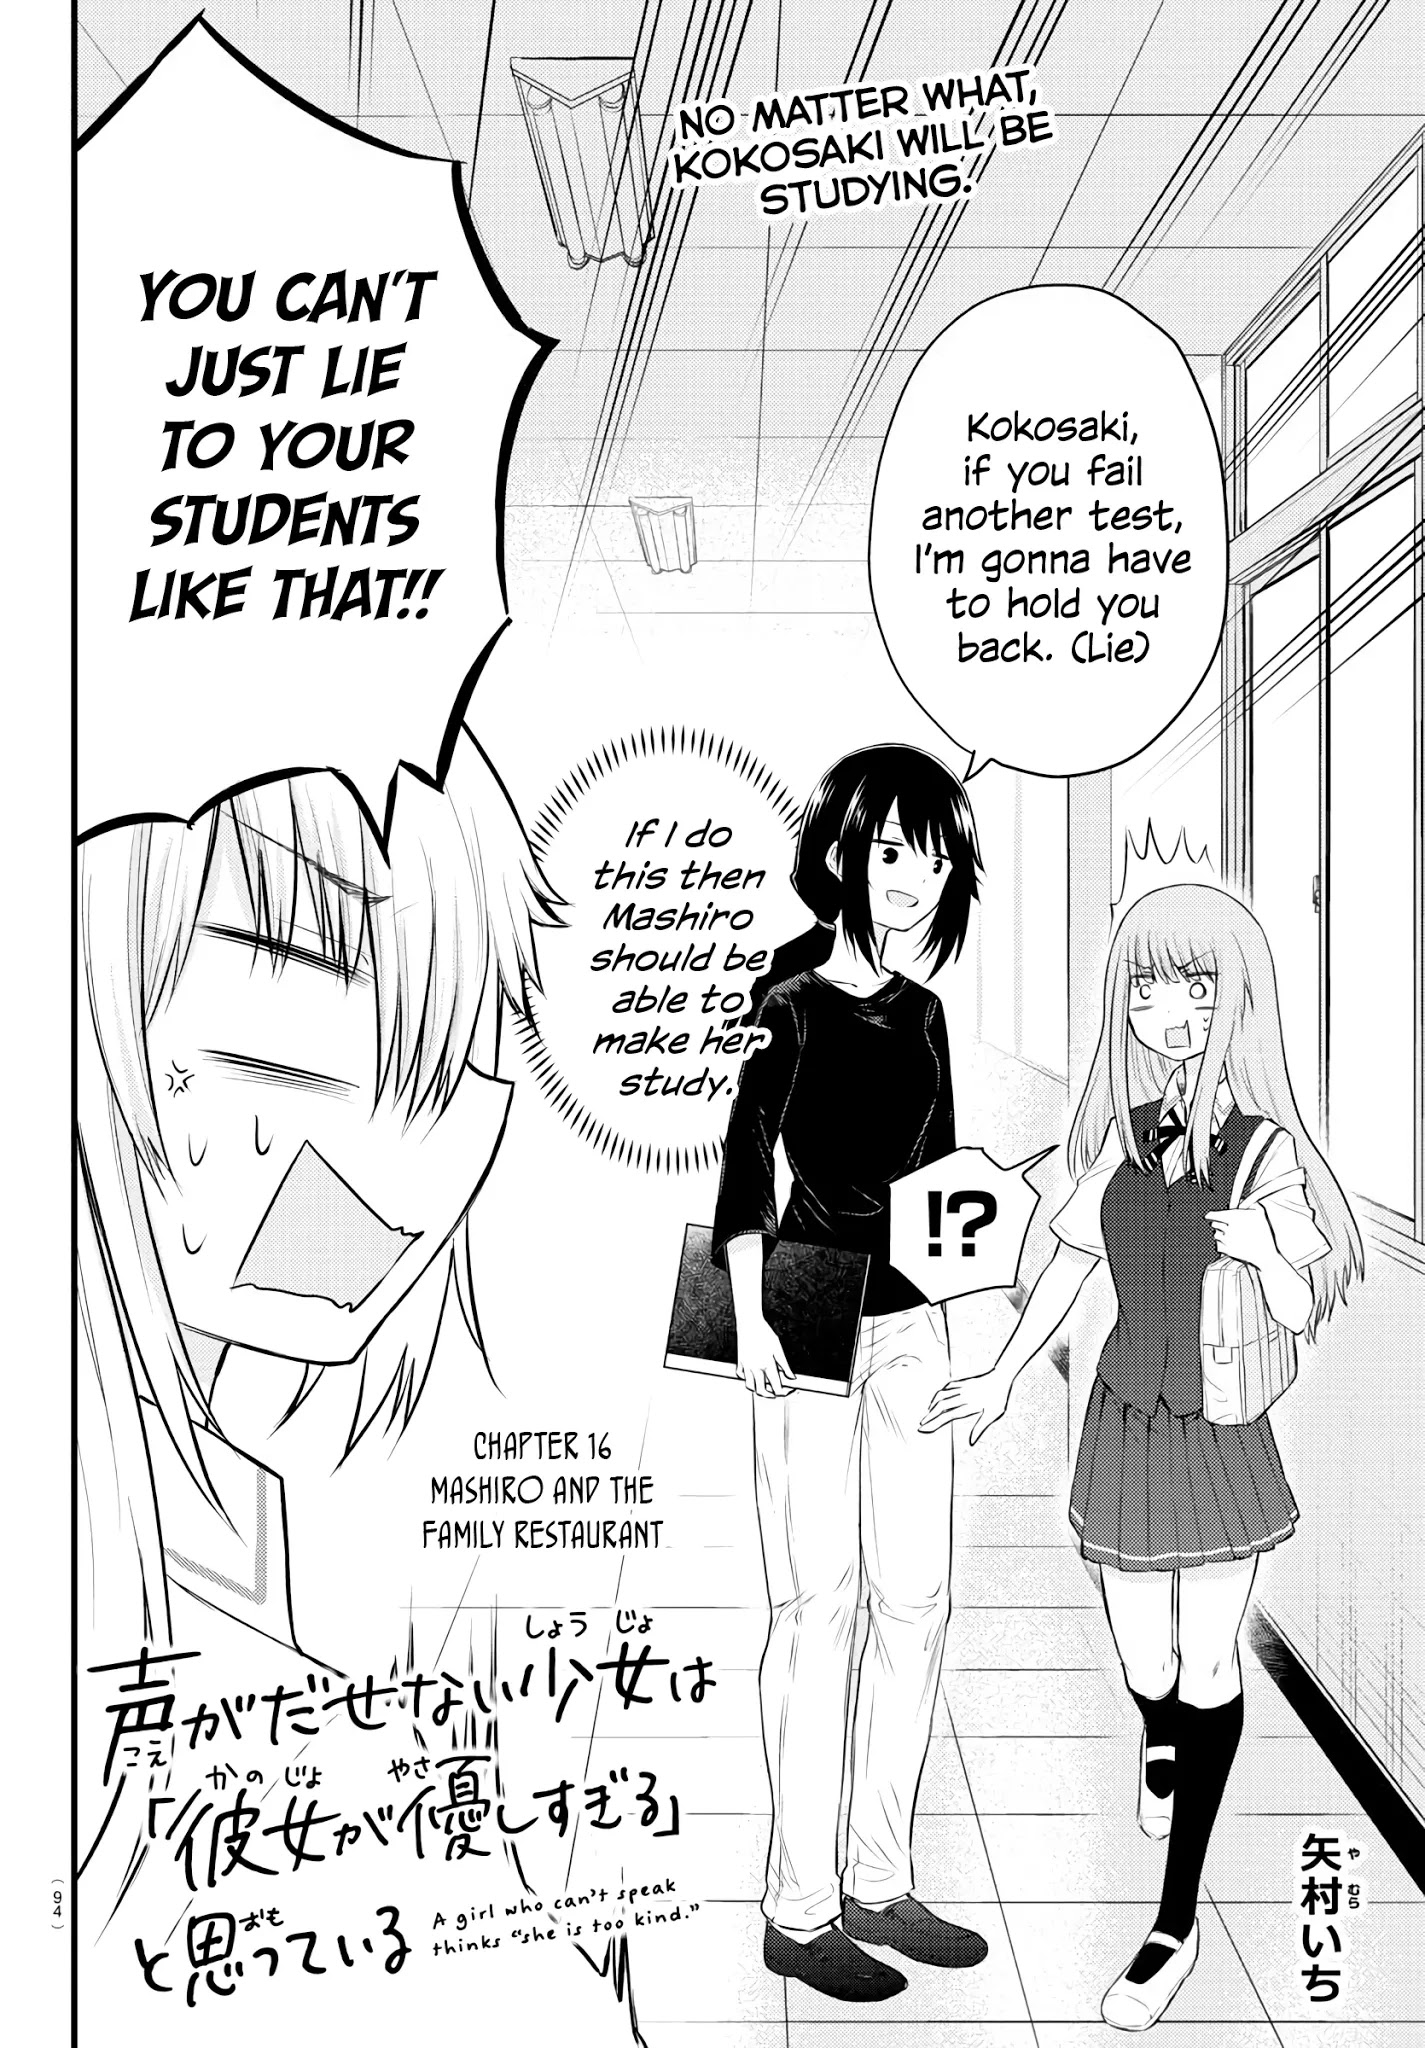 The Mute Girl And Her New Friend (Serialization) Chapter 16: Mashiro And The Family Restaurant - Picture 2